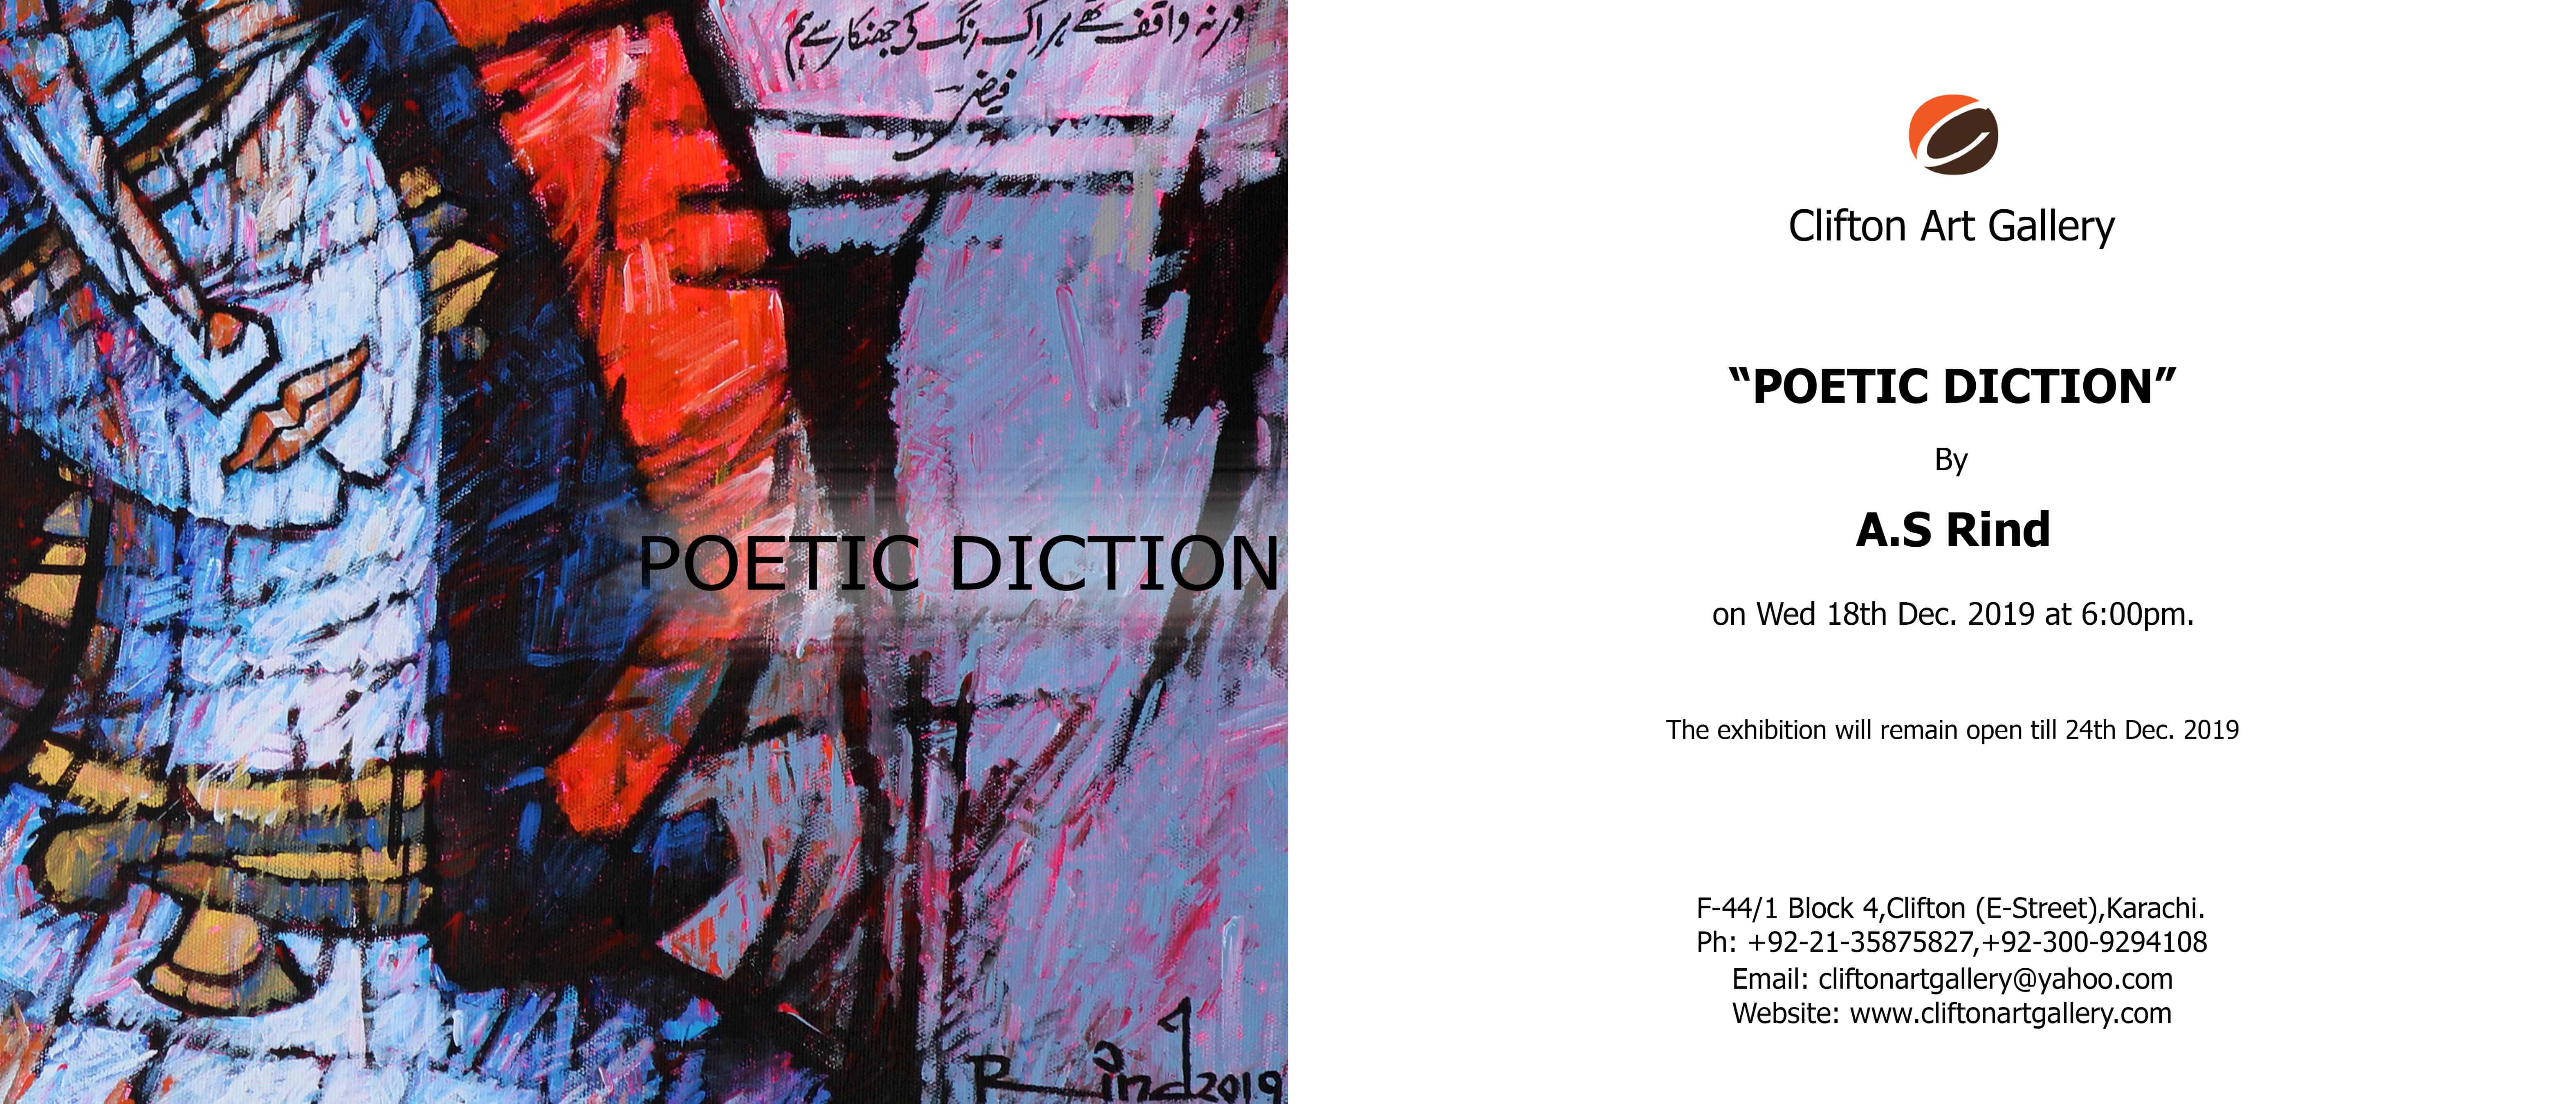 Poetic Diction A S Rind Title page and event details Clifton Art Gallery